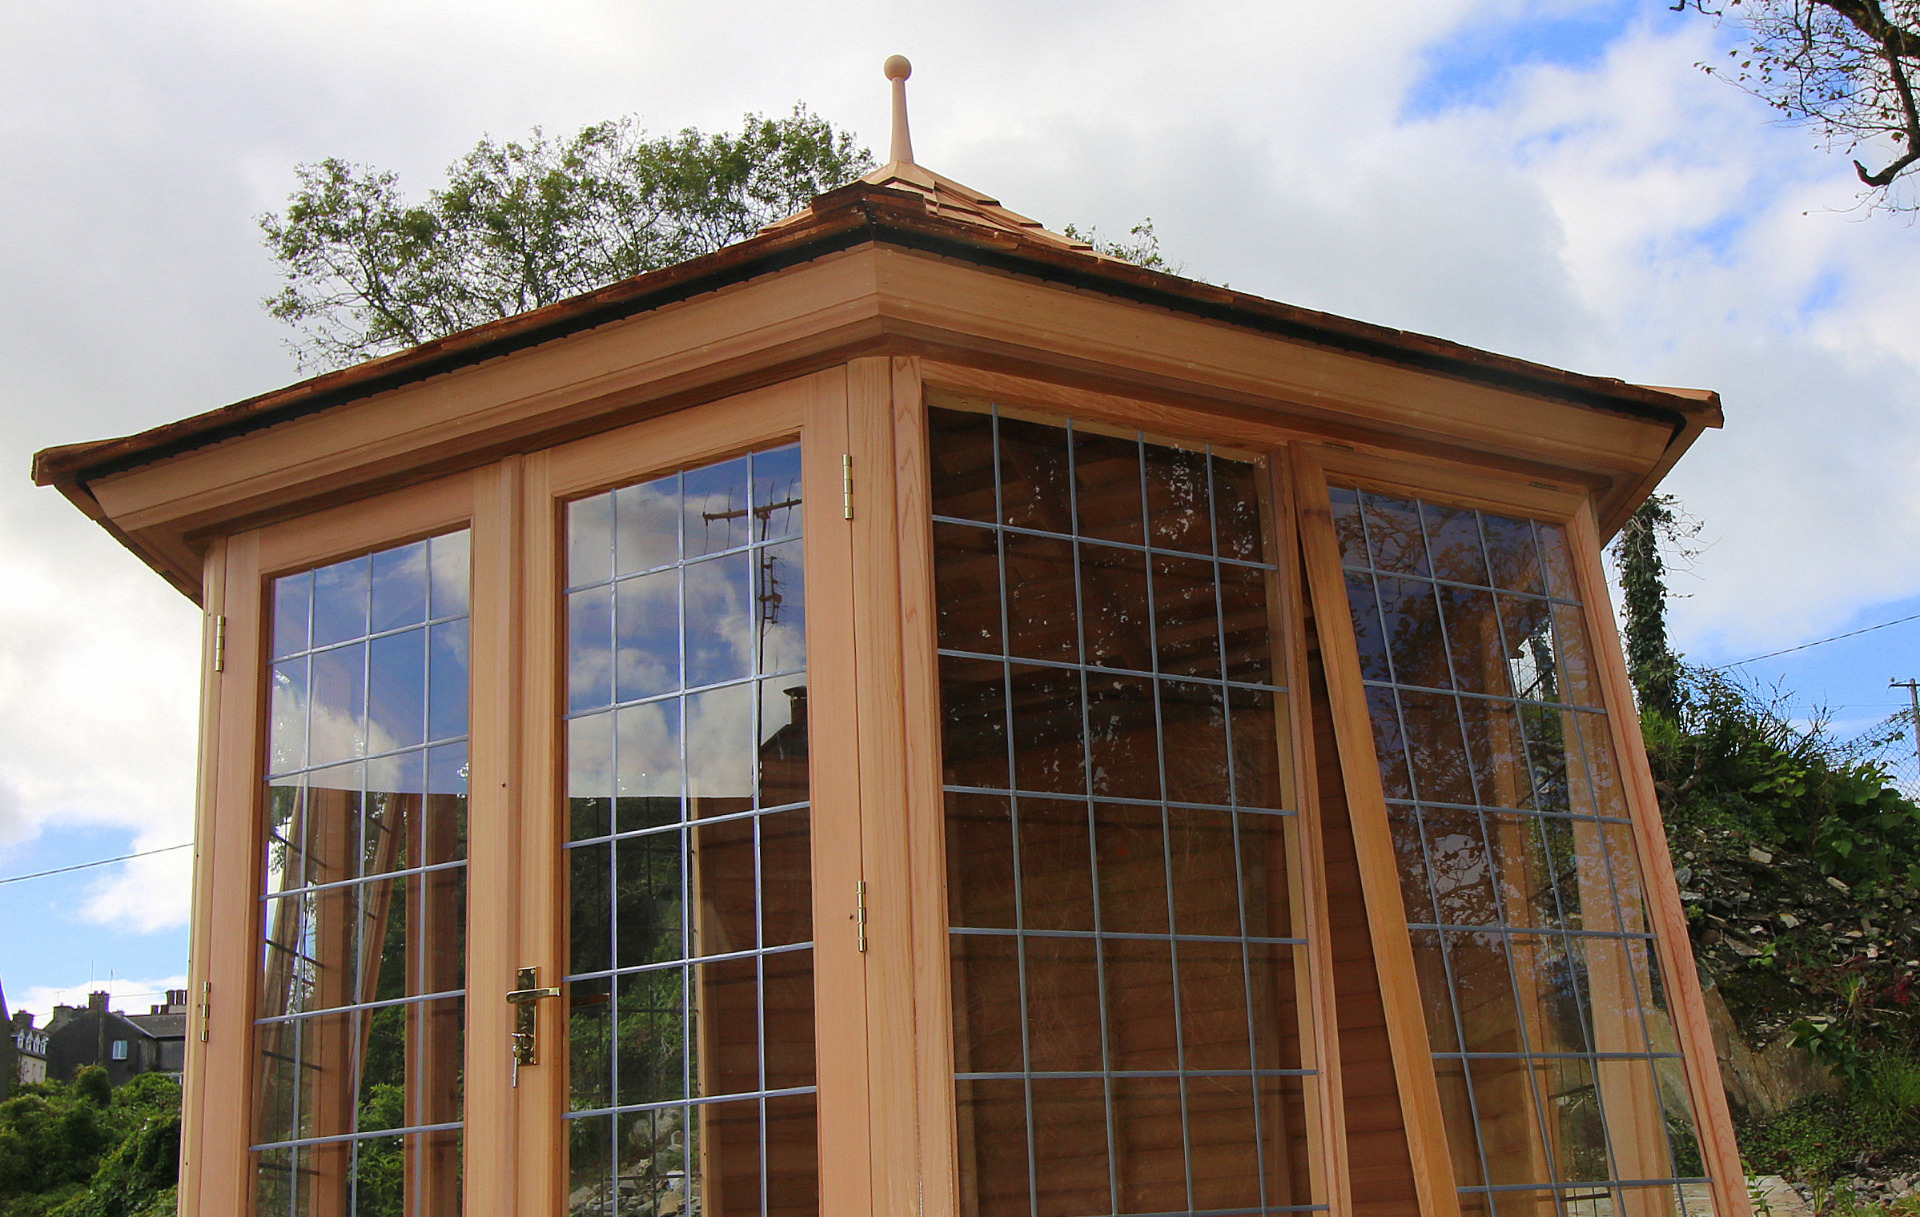 Stunning timber garden rooms and summerhouses, supplied + fitted in Co Cork.